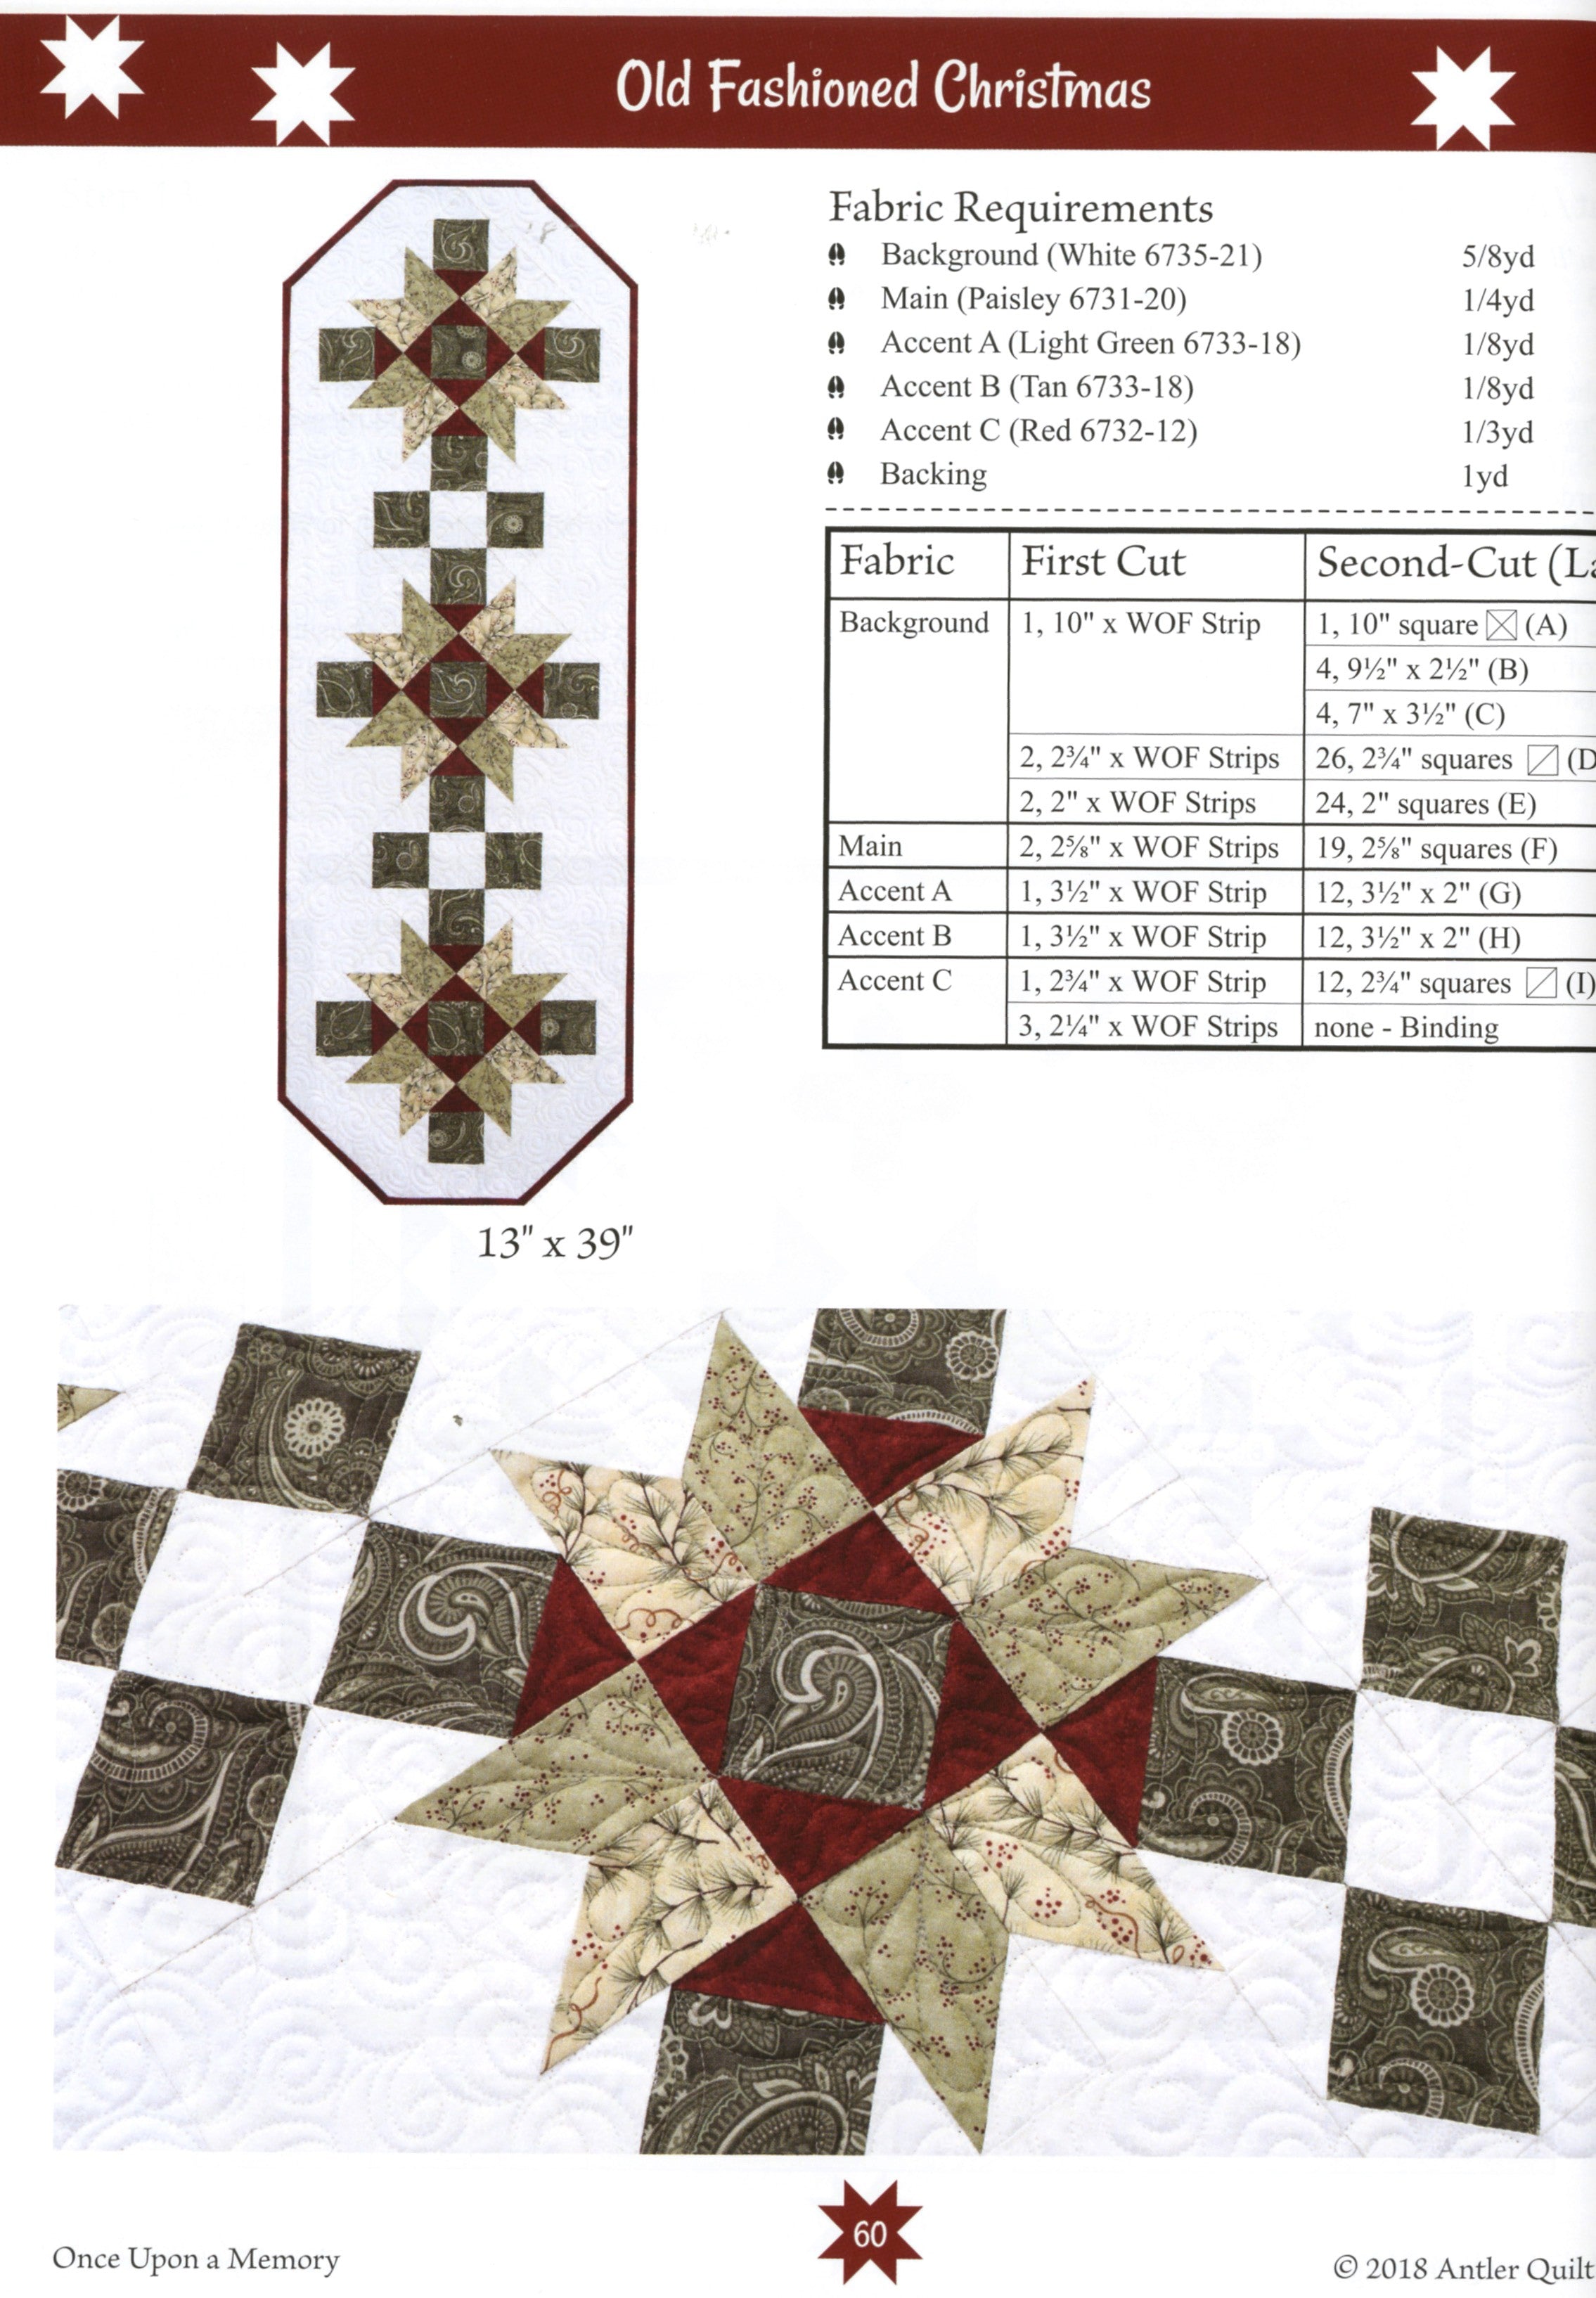 Once Upon a Memory Quilt Pattern Book by Doug Leko of Antler Quilt Designs